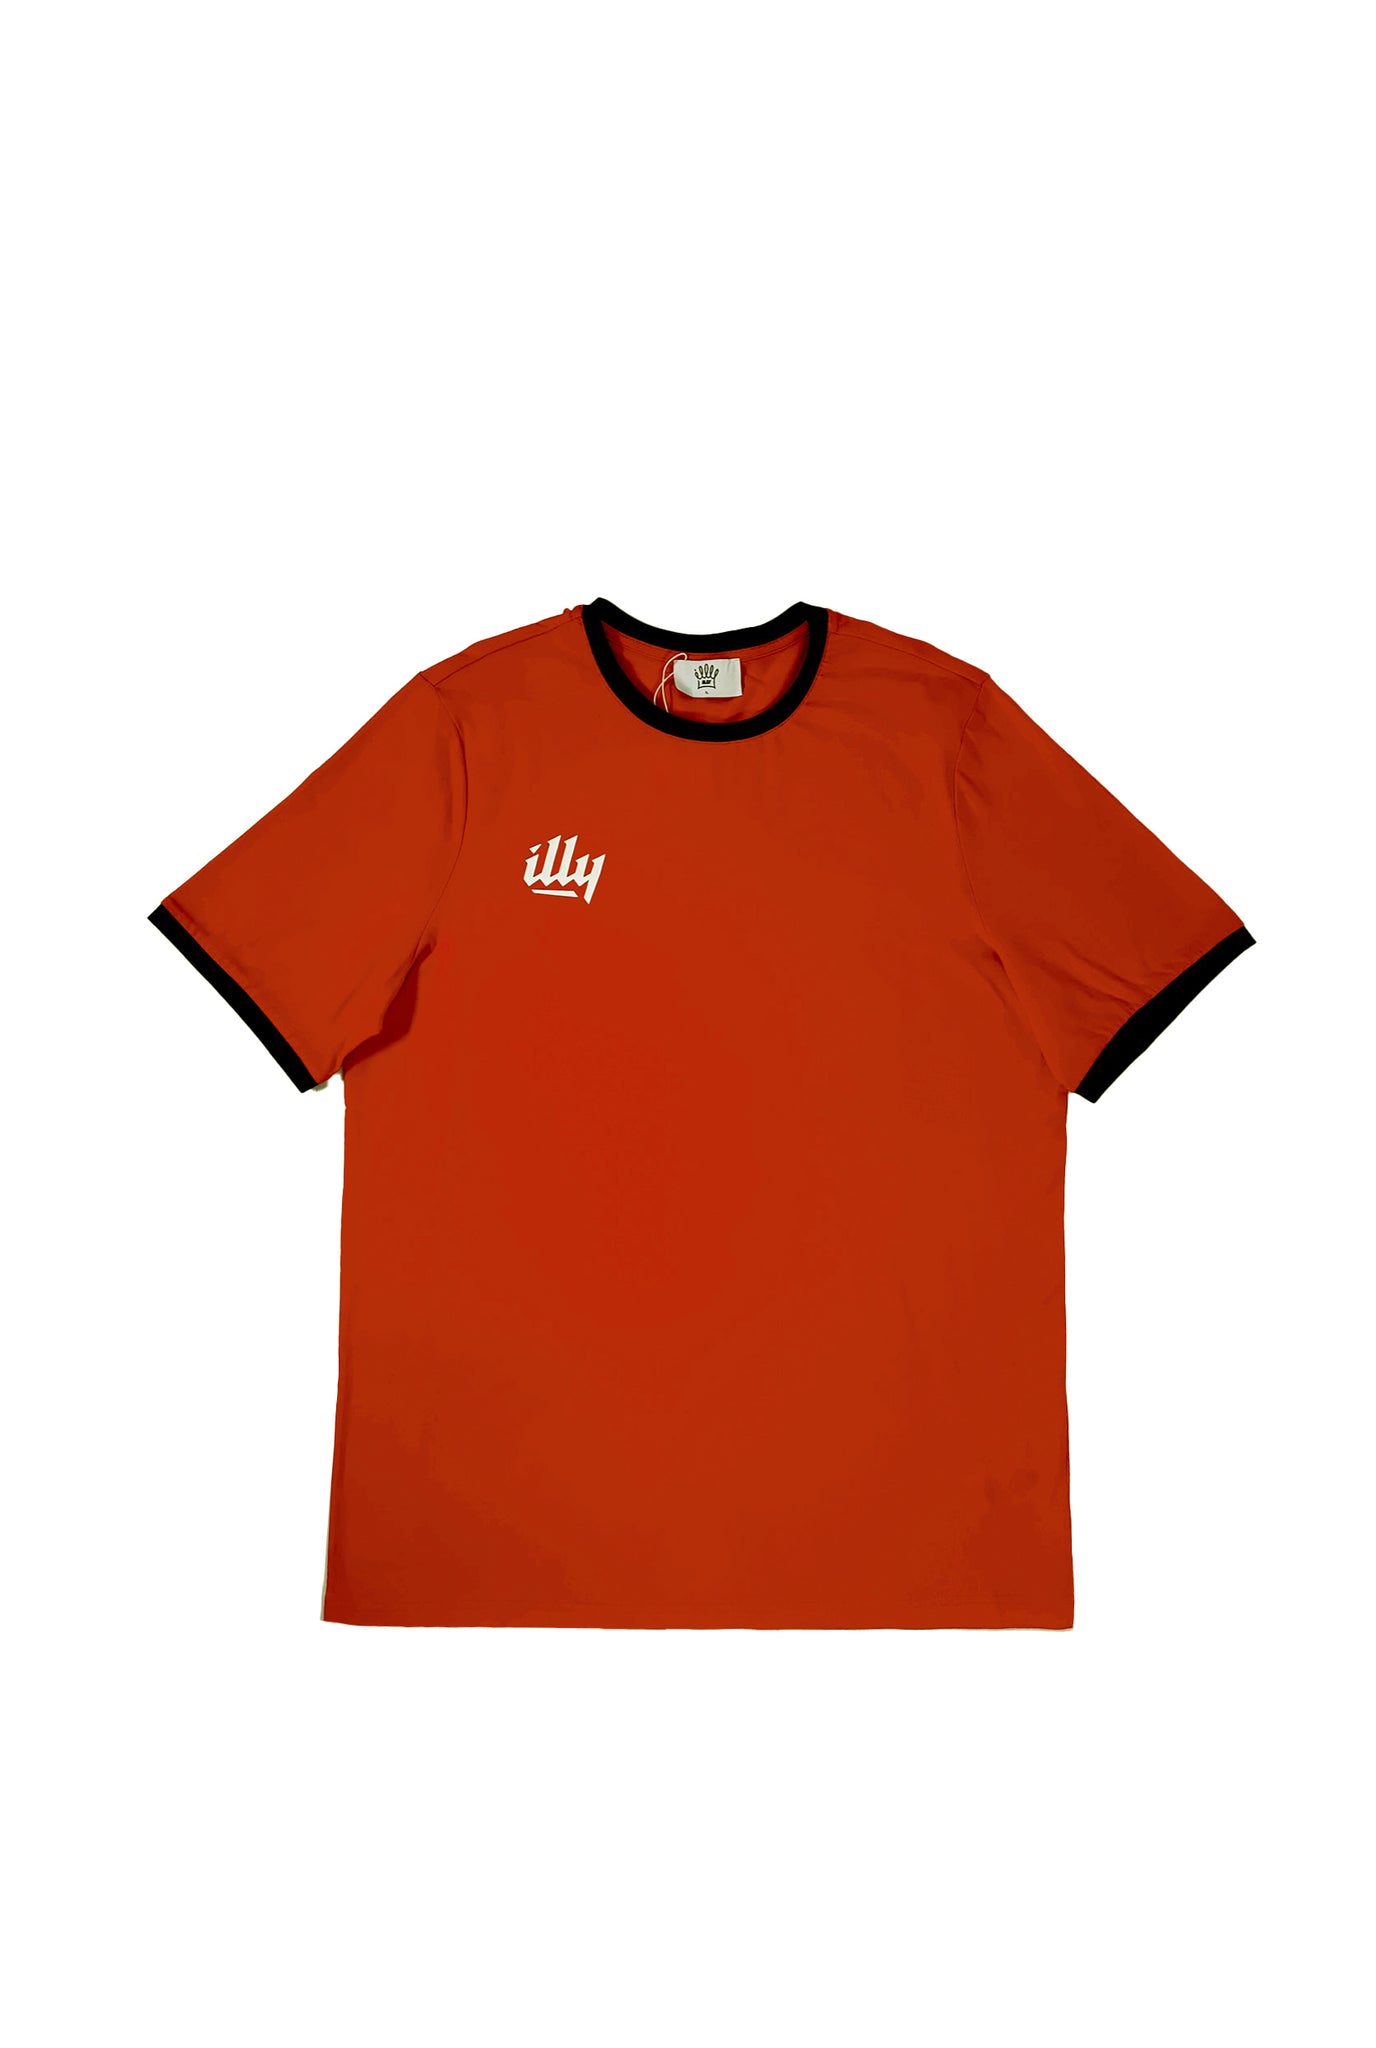 ILLY RETRO TEE IN FLAME